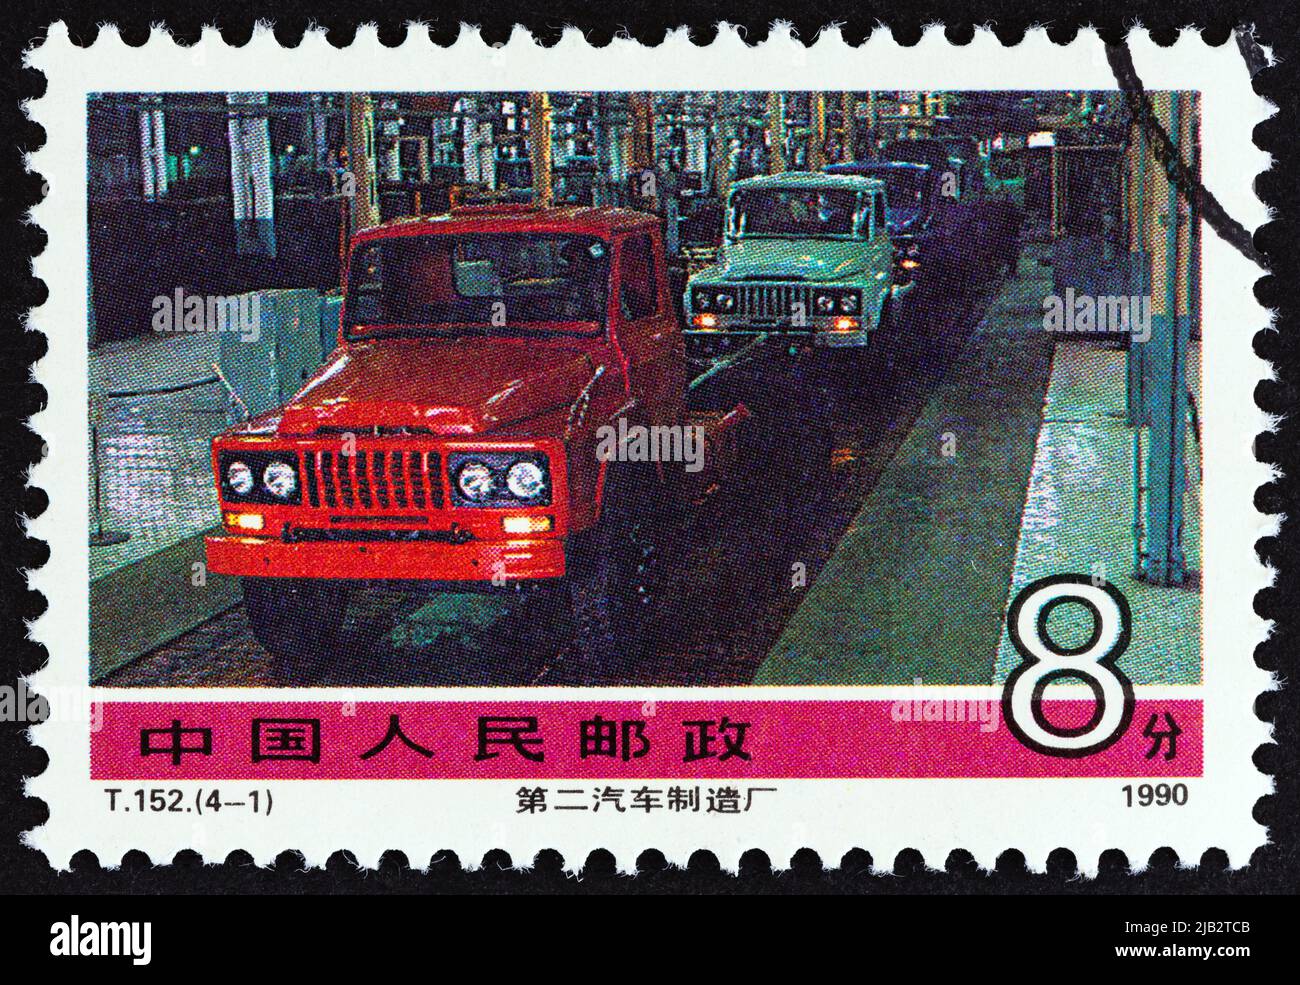 CHINA - CIRCA 1990: A stamp printed in China from the 'Achievements of Socialist Construction' issue shows Second automobile factory, circa 1990. Stock Photo